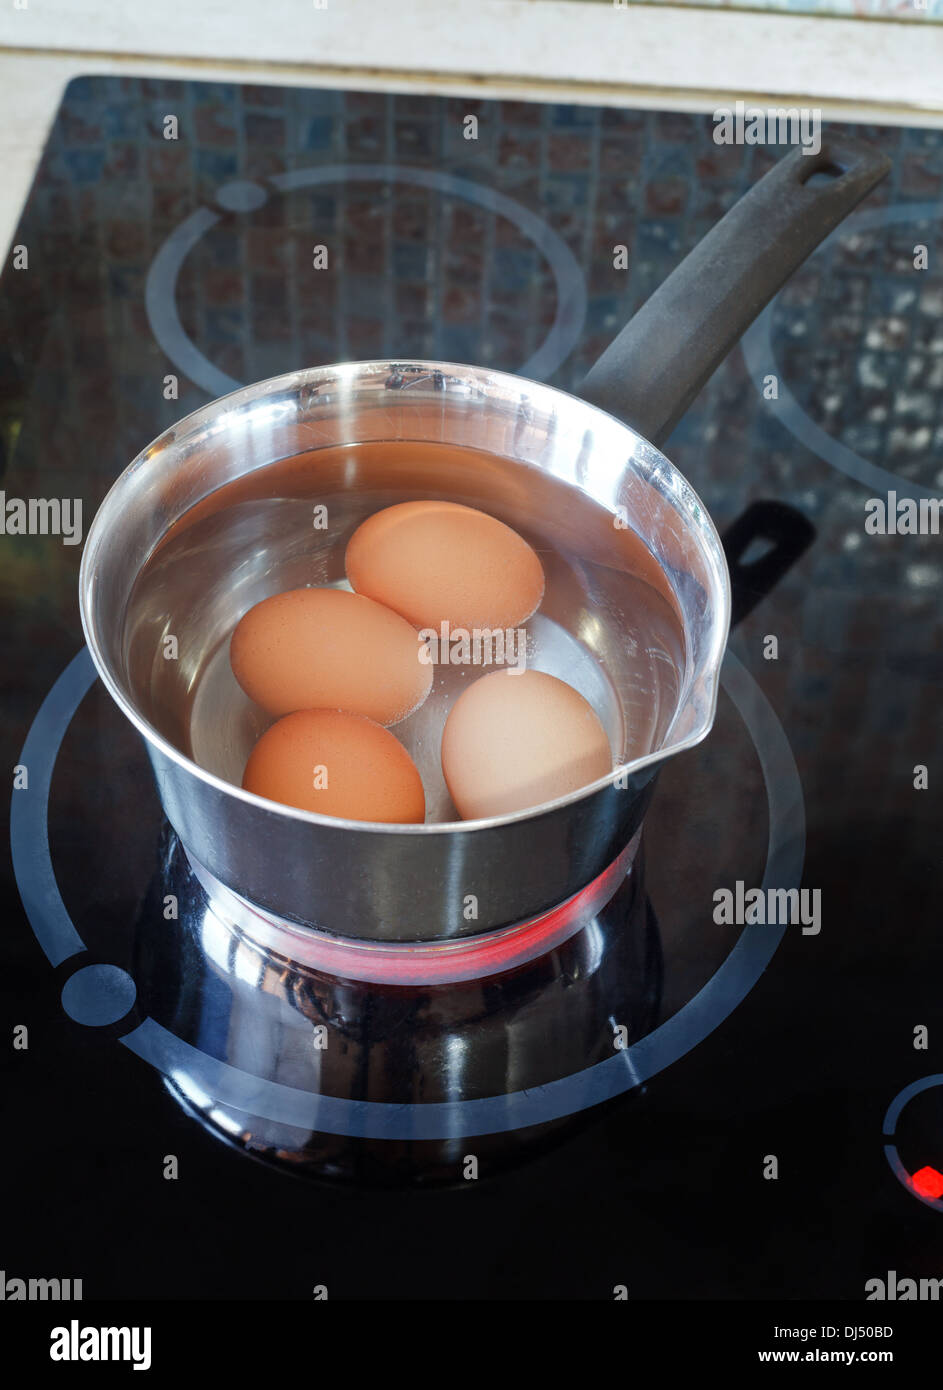 Chicken eggs are cooked in metal pot on electric stove in kitchen Stock Photo